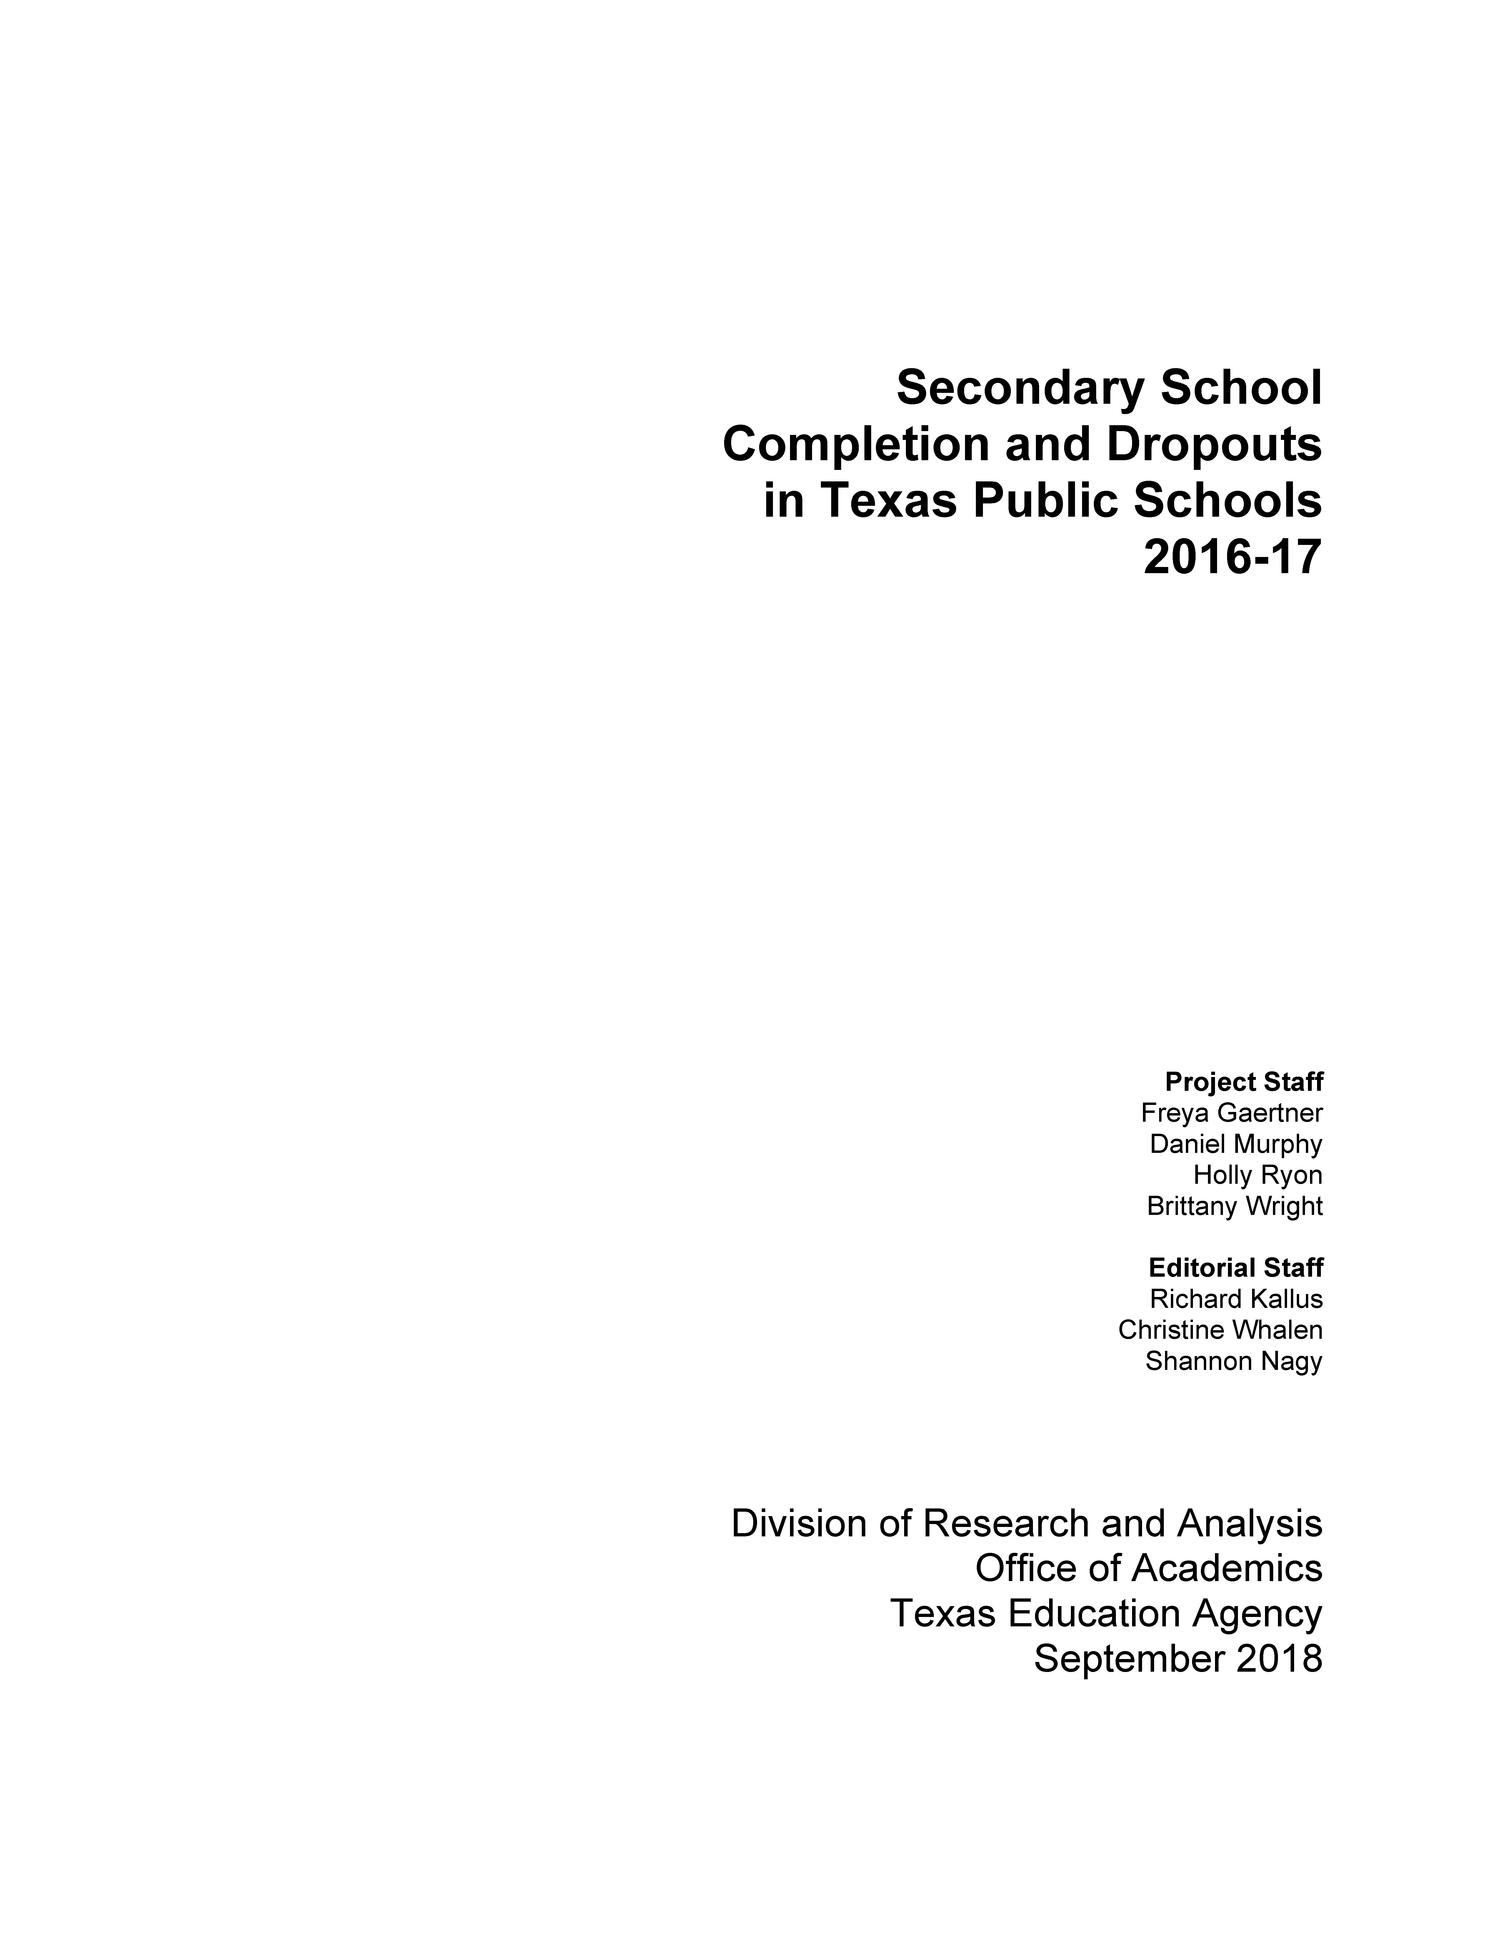 Secondary School Completion and Dropouts in Texas Public Schools: 2016-2017
                                                
                                                    Title Page
                                                